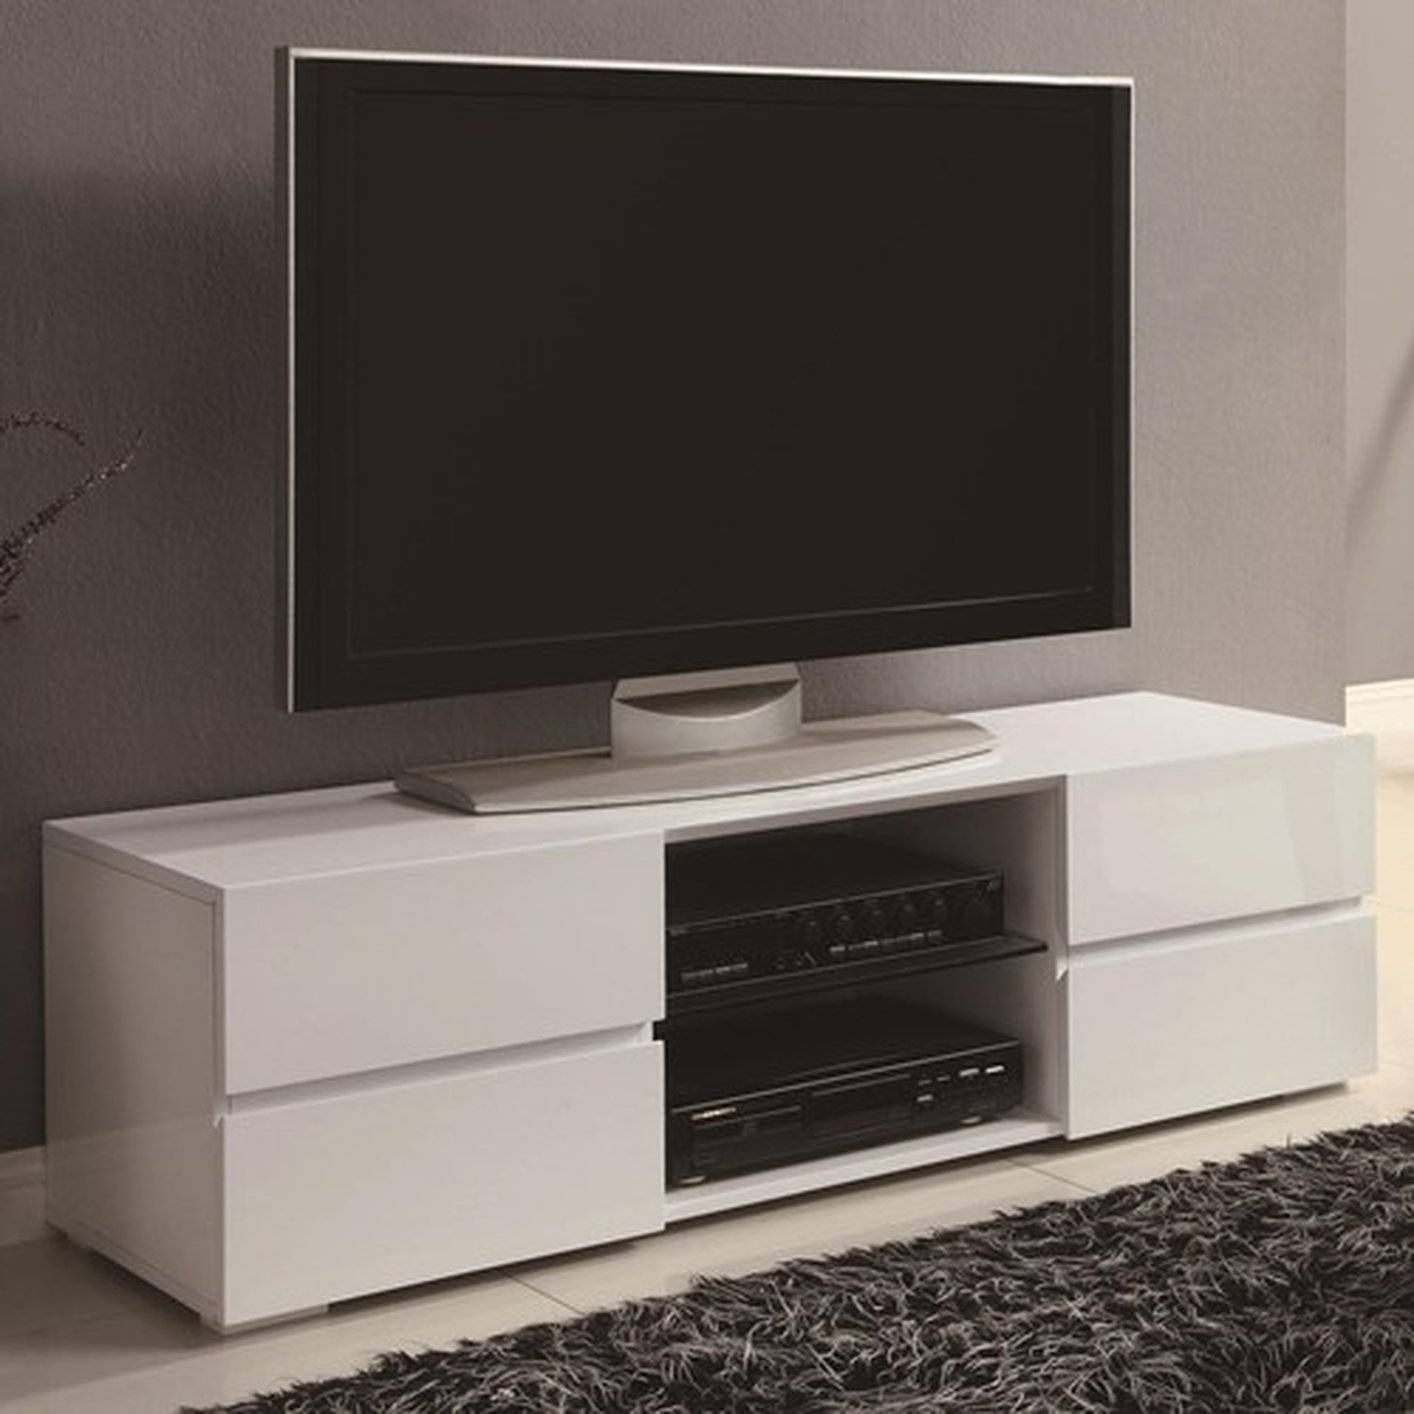 White Wood Tv Stand – Steal A Sofa Furniture Outlet Los Angeles Ca Within White Wood Tv Stands (View 1 of 15)